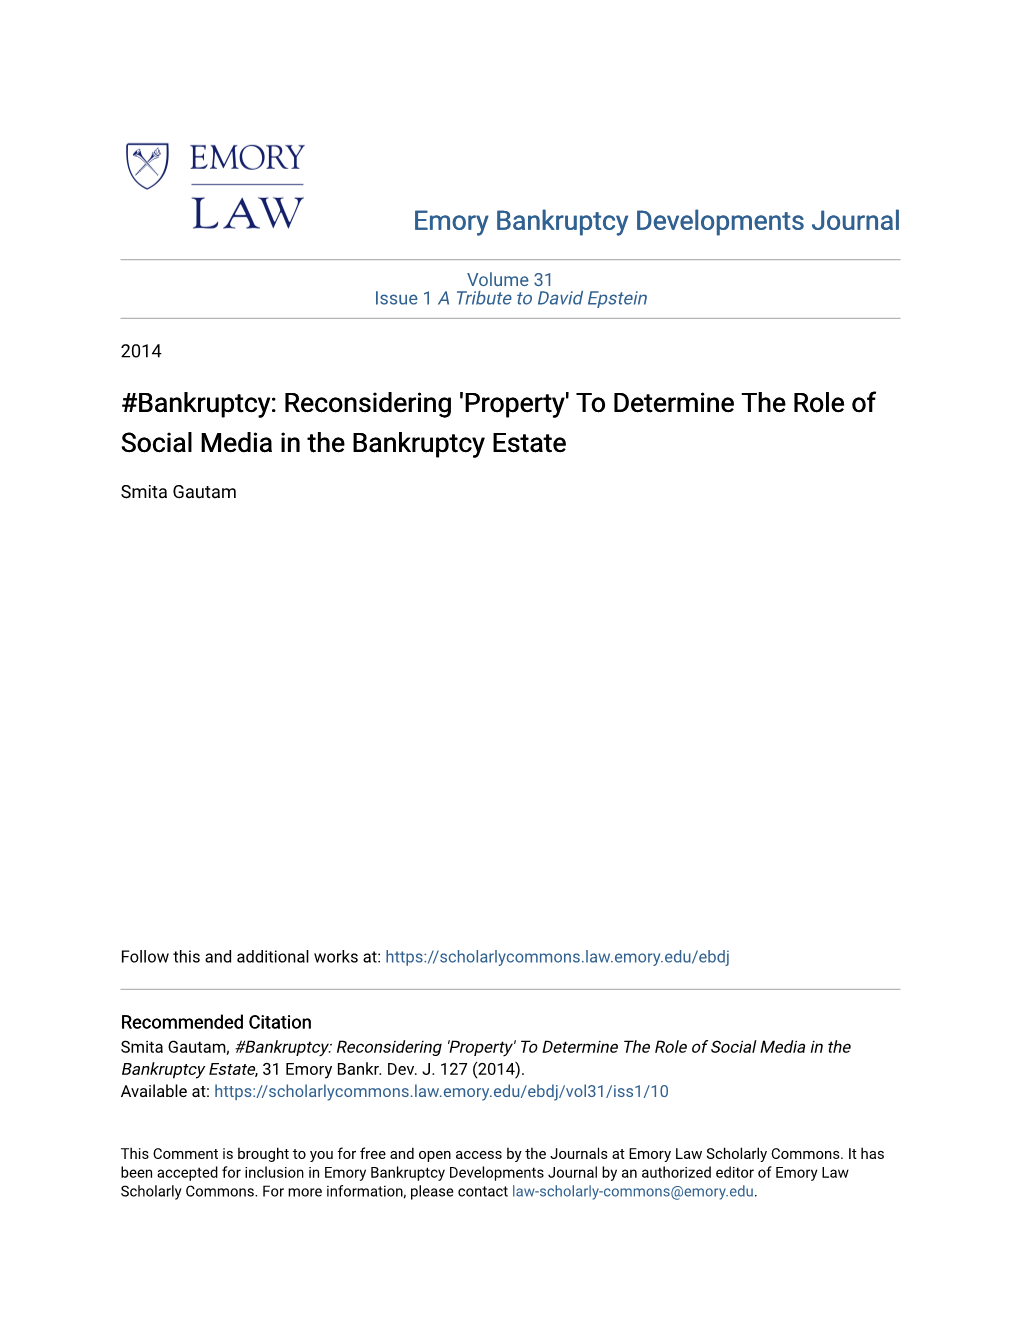 To Determine the Role of Social Media in the Bankruptcy Estate